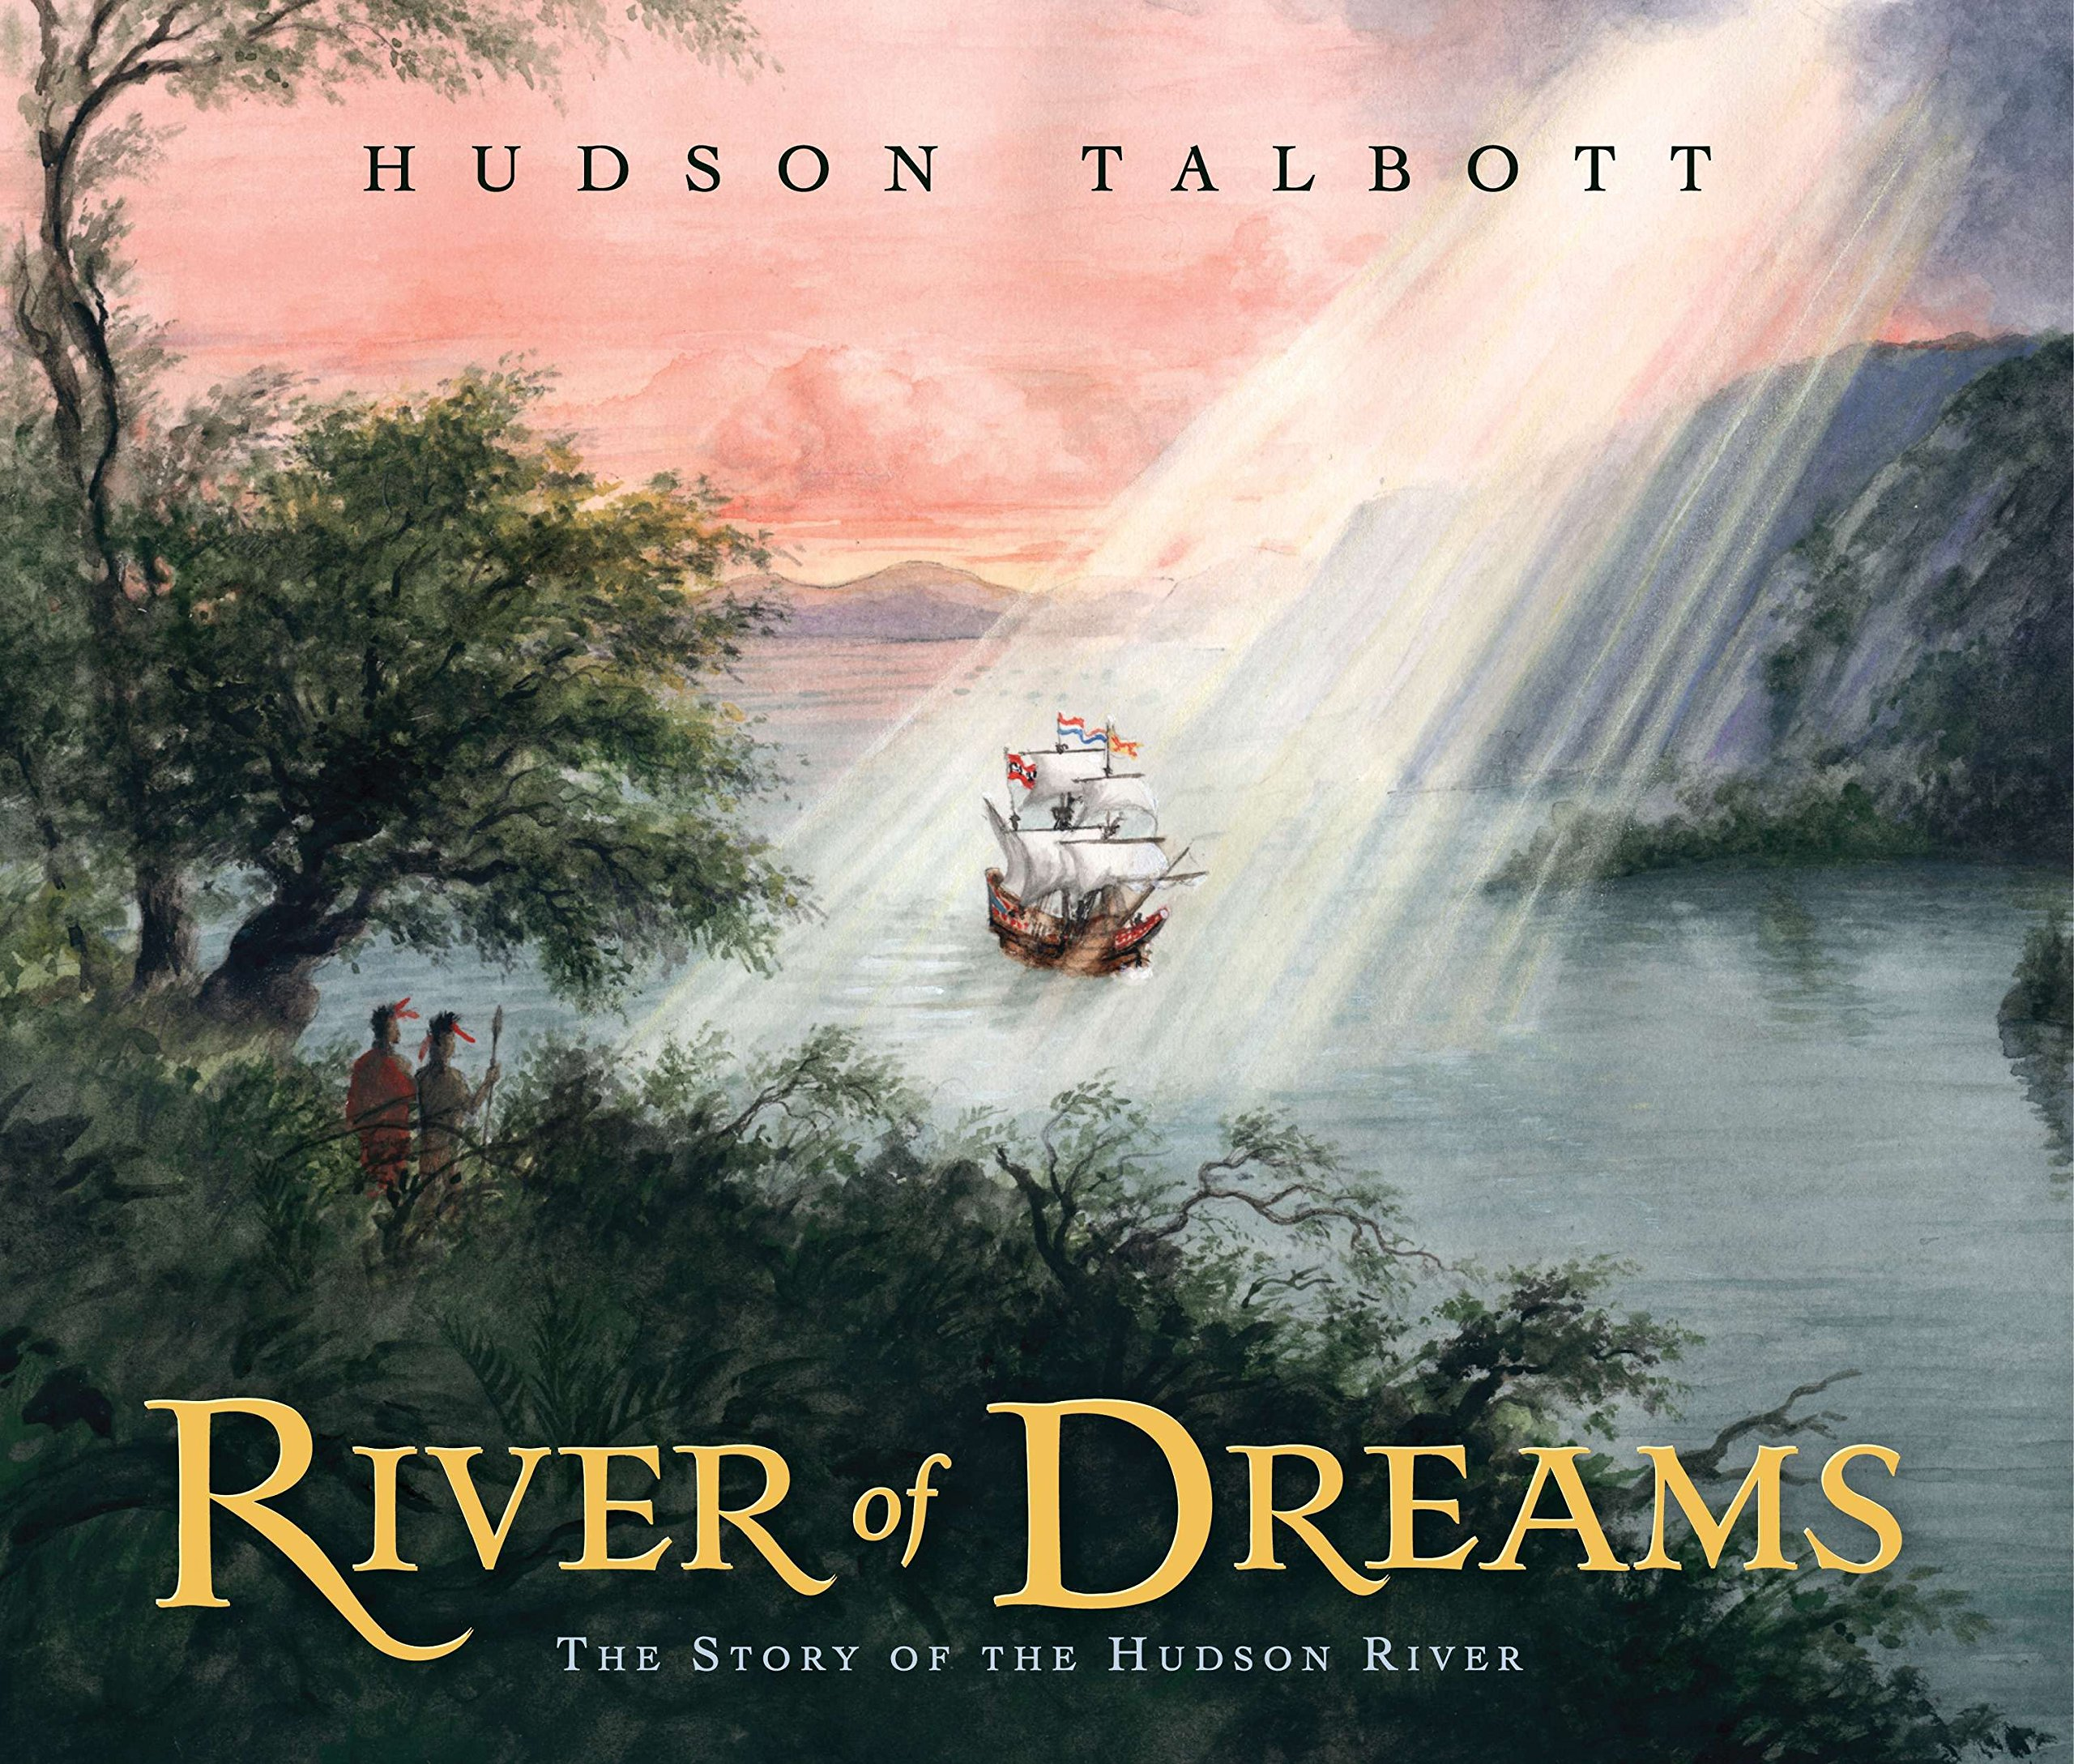 River of Dreams: The Story of the Hudson River by Hudson Talbott